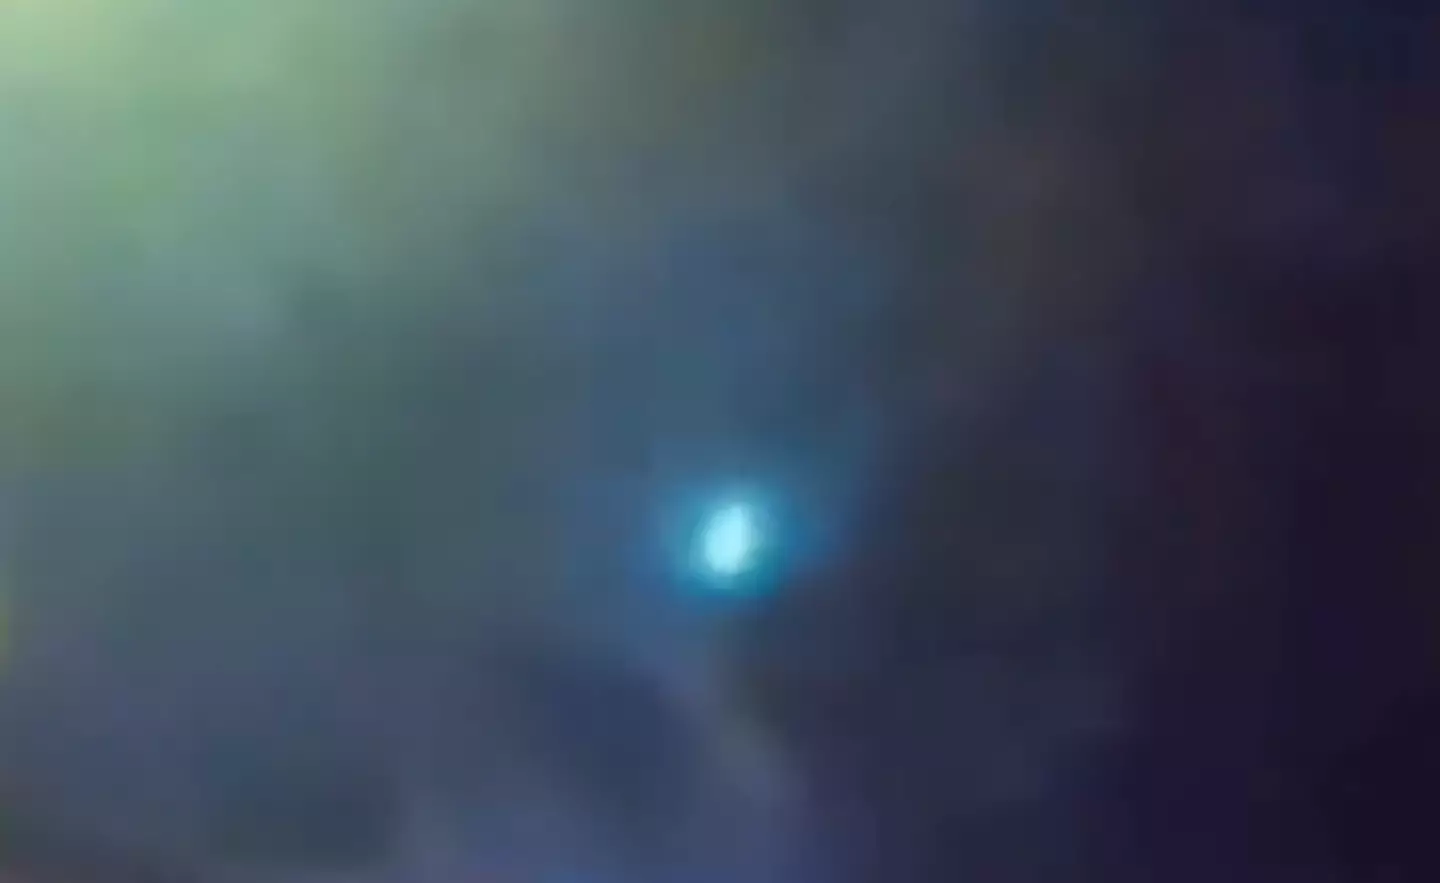 A light was spotted in the sky.